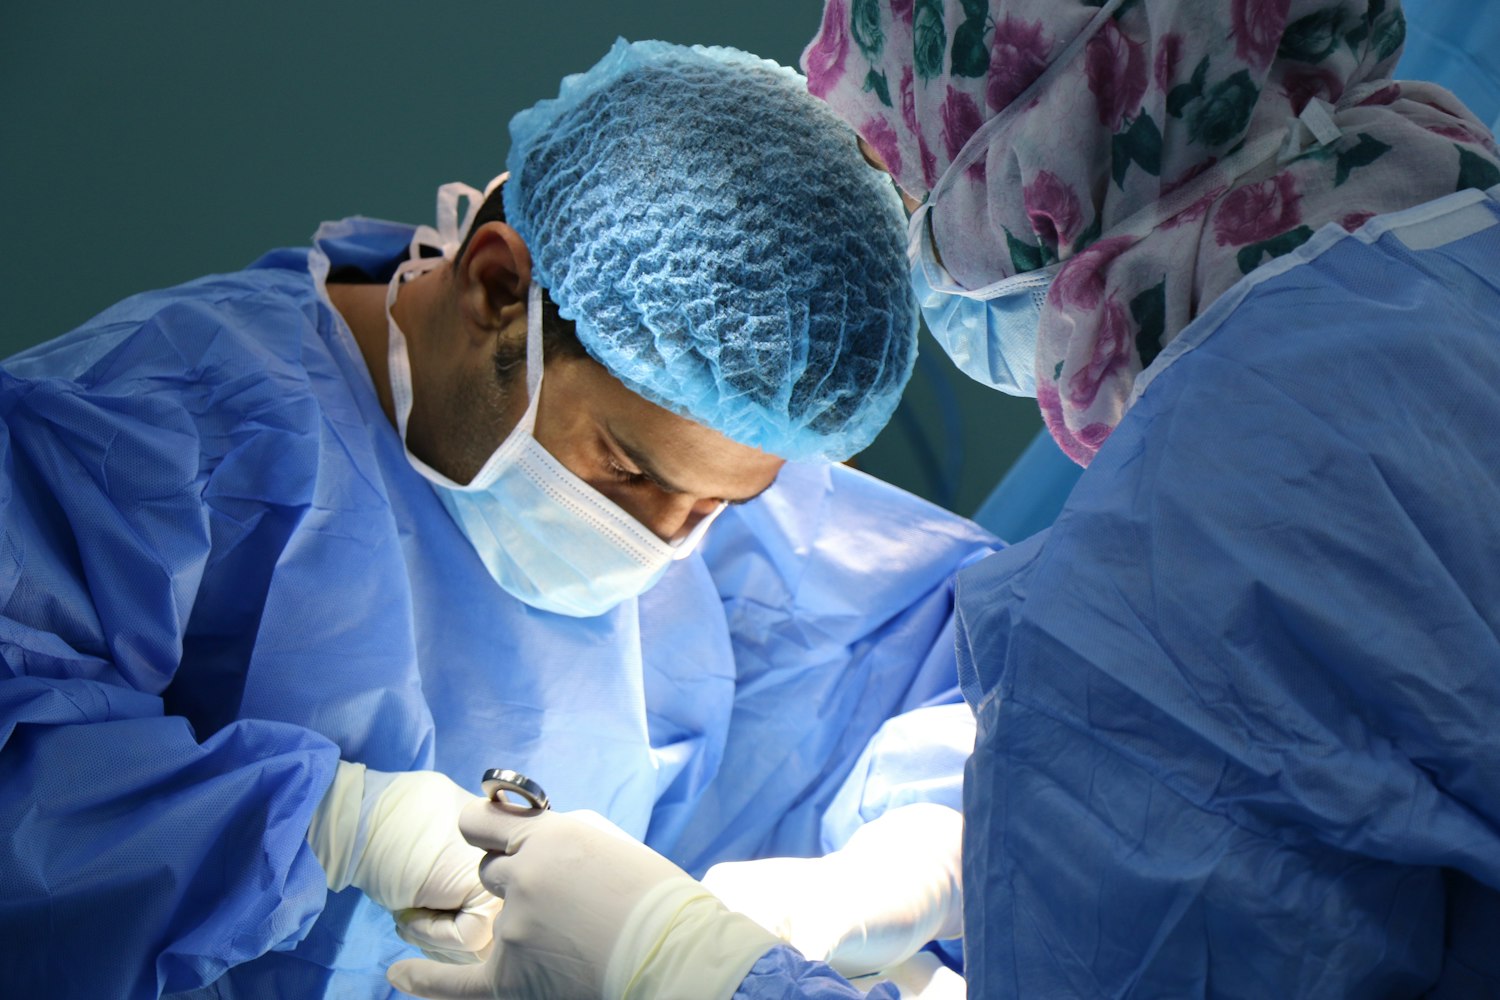 medical personnel doing operation in operating room